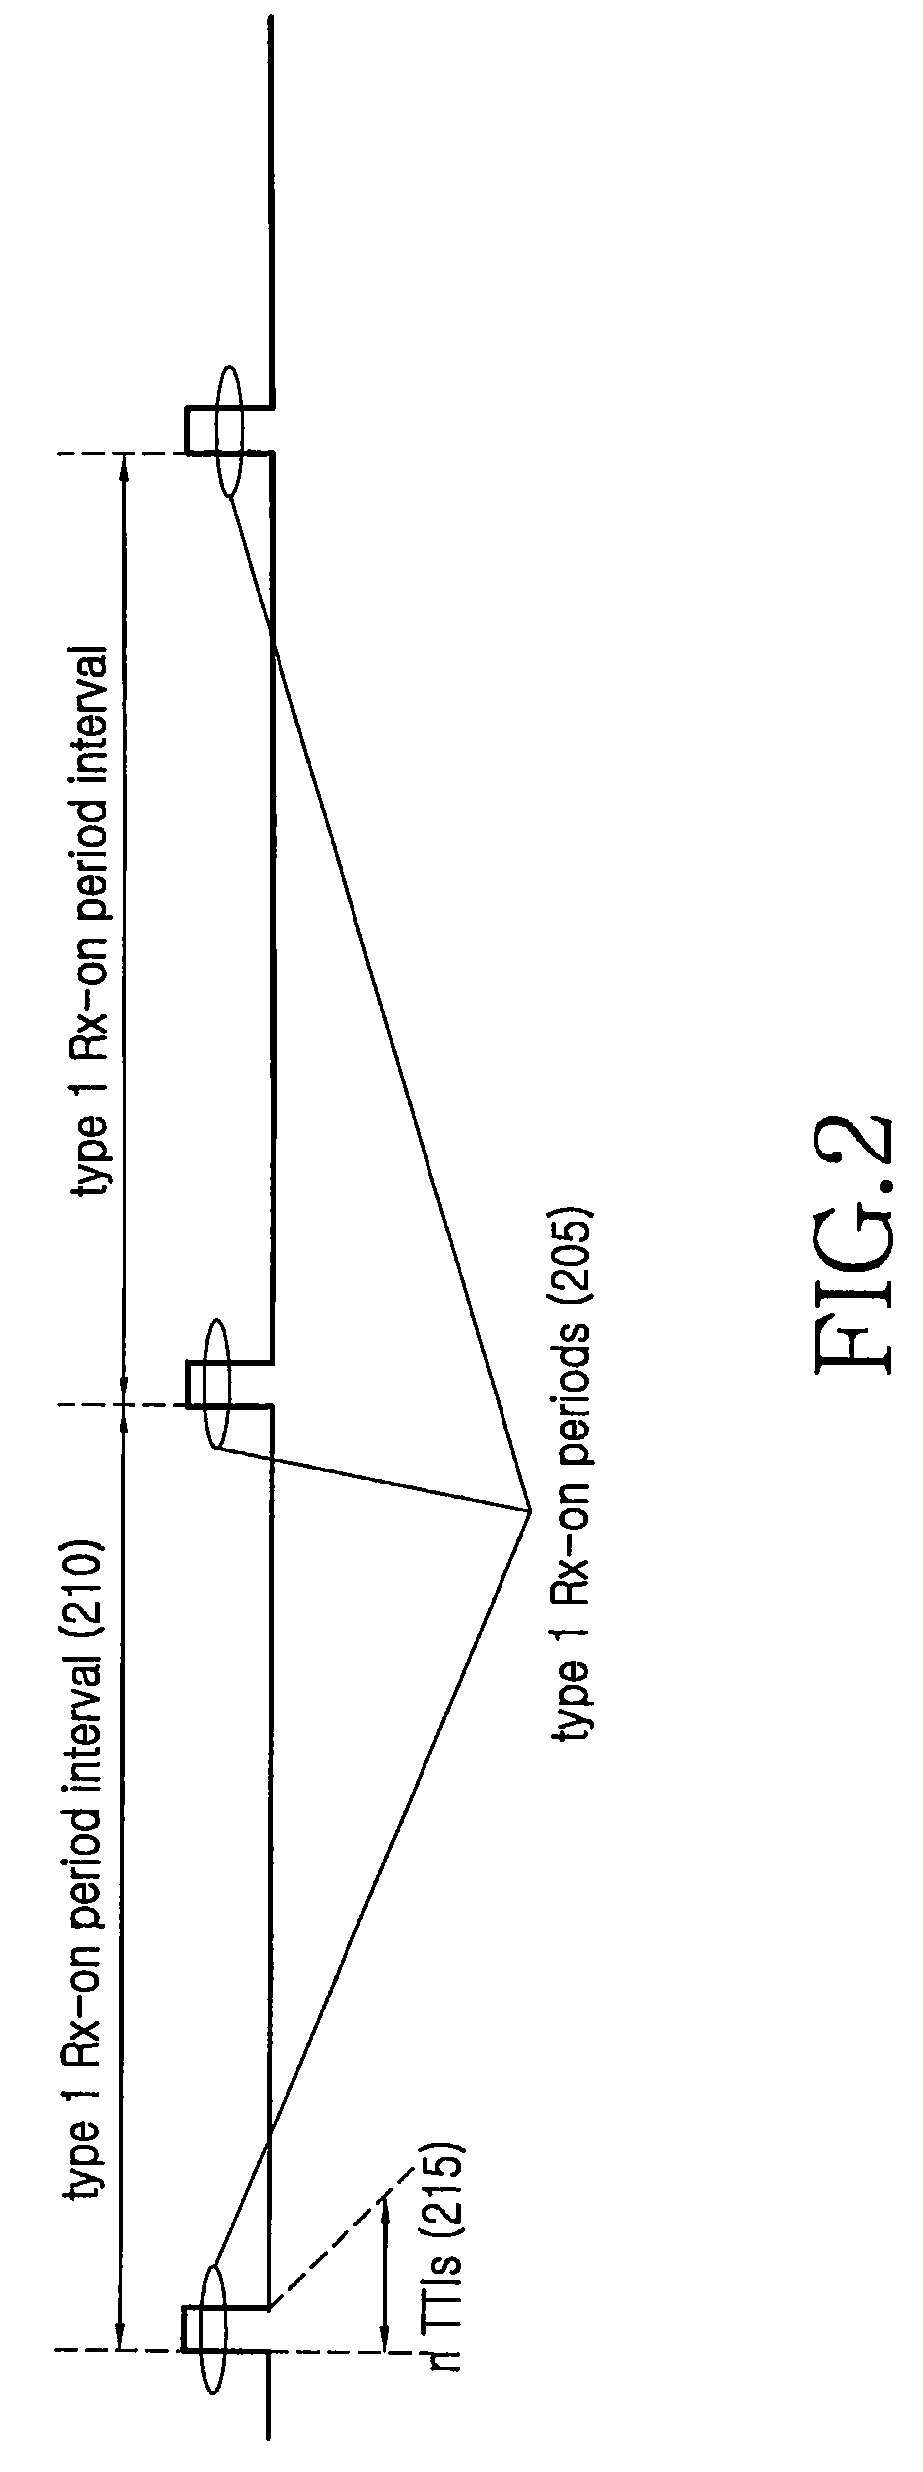 Apparatus and method for discontinuous reception in mobile telecommunication system